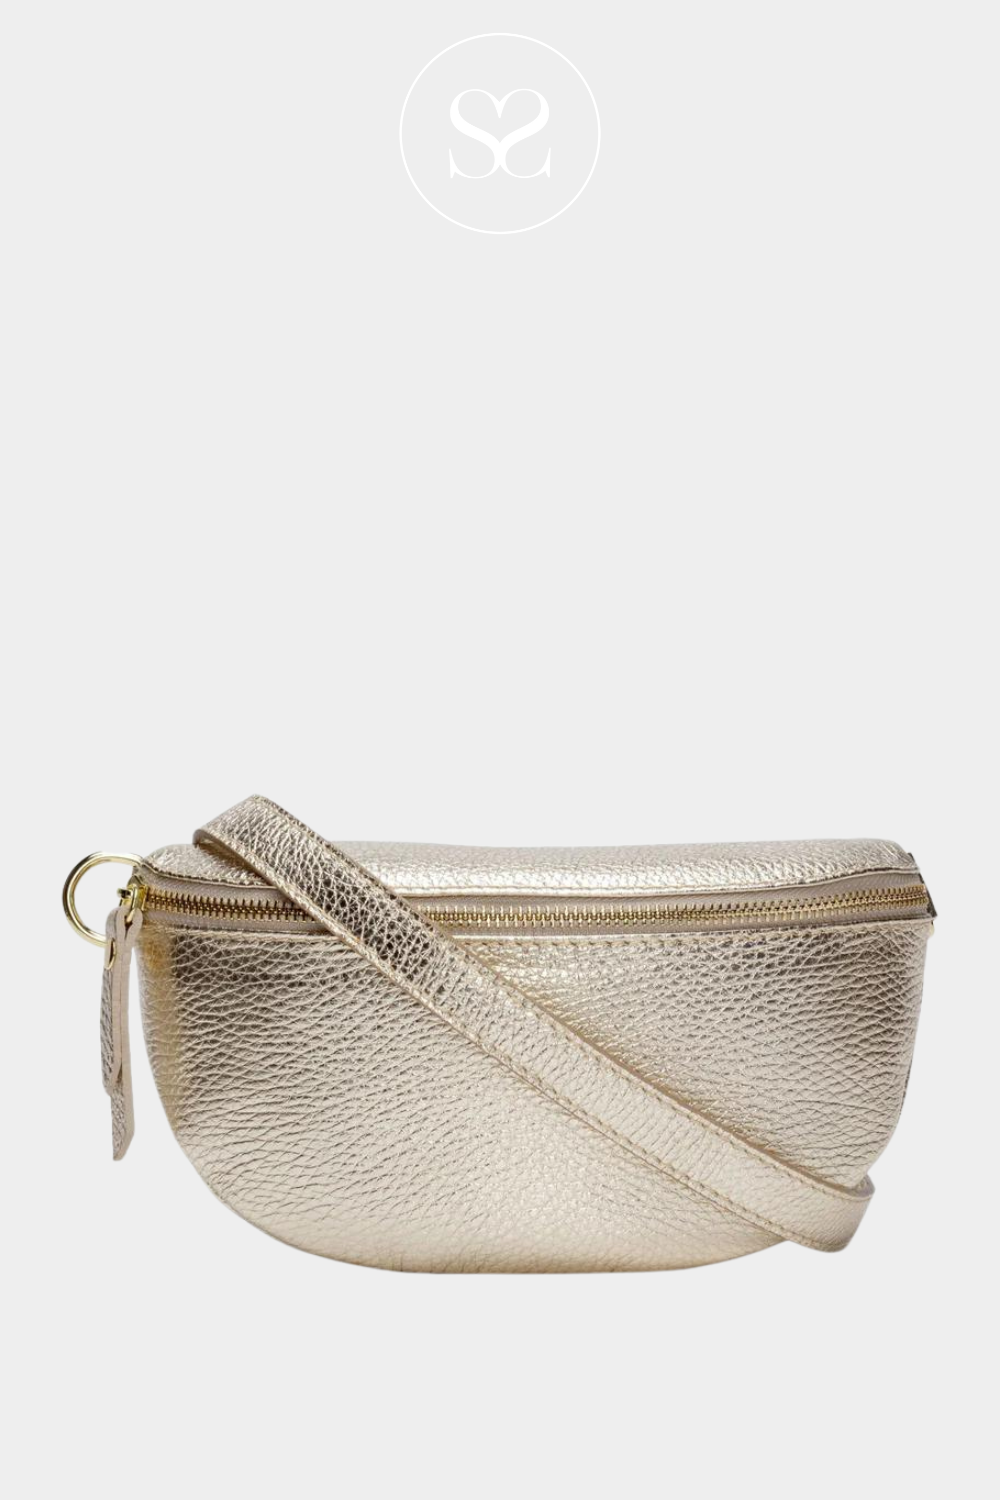 gold leather crossbody bag / bum bag from Elie Beaumont